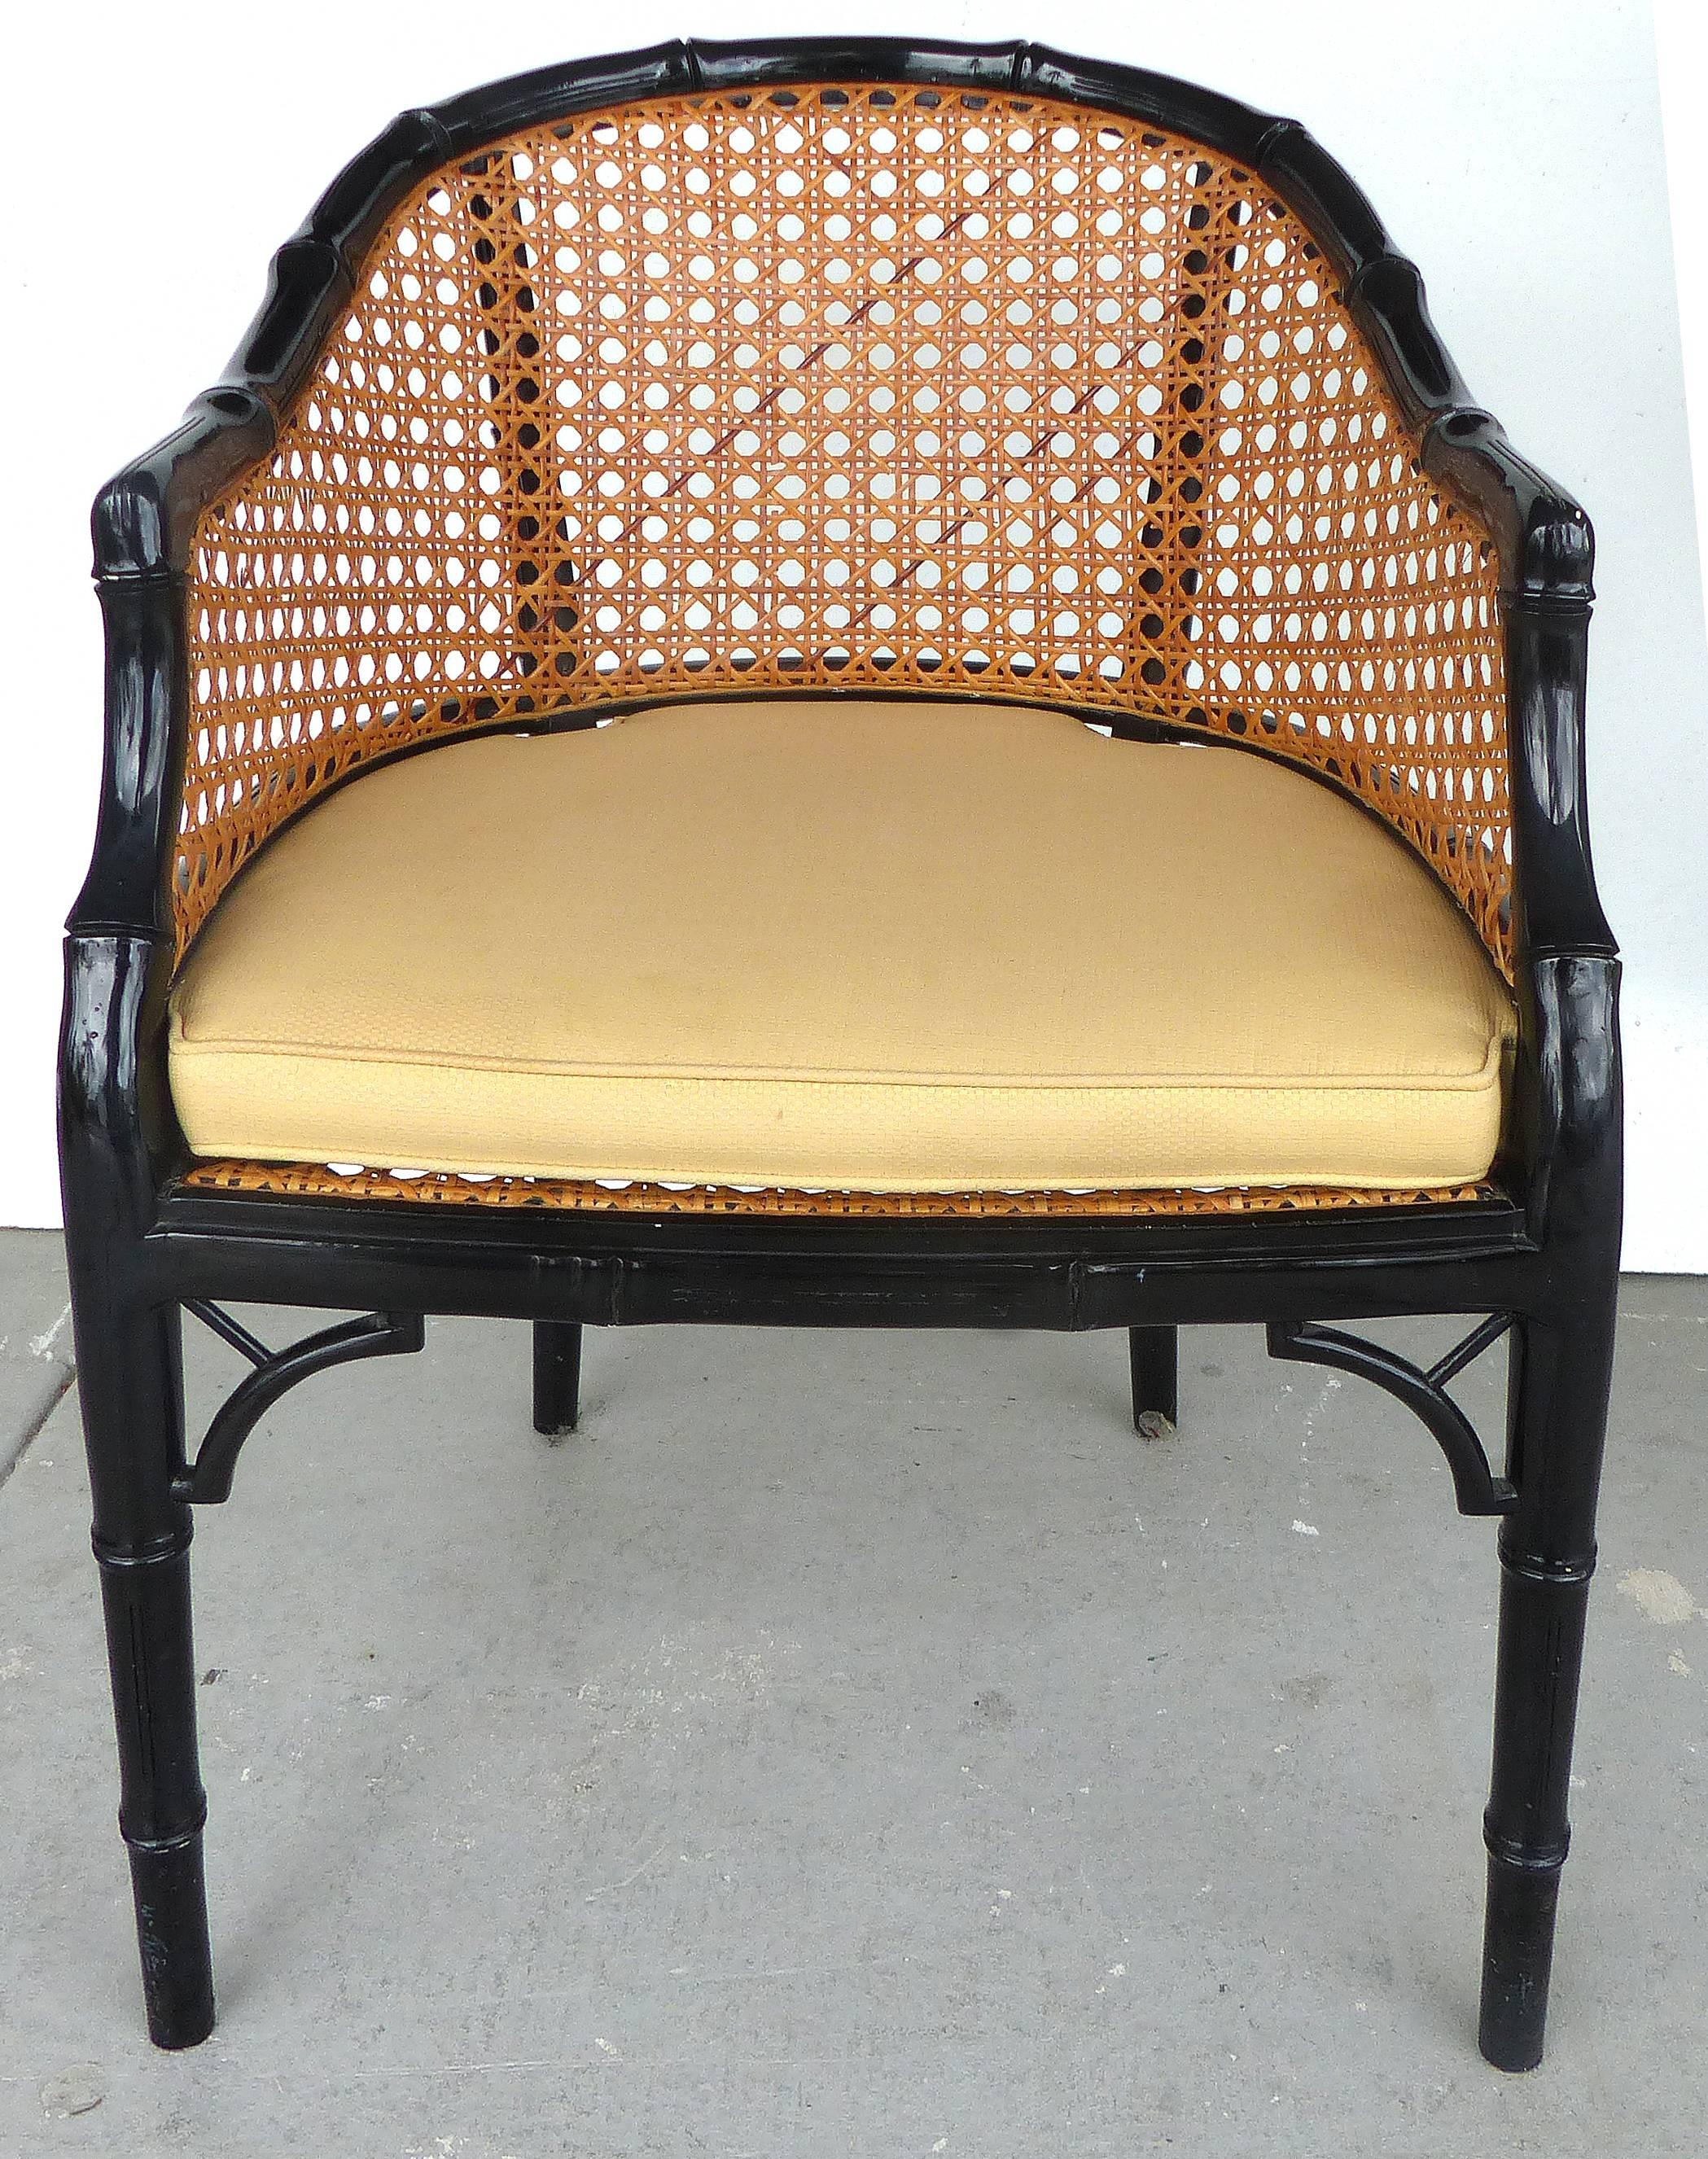 
 

A pair of gloss lacquered carved faux-bamboo wood barrel-back chairs with inset over-scale woven cane panels. The fitted cushions are reversable and in very nice condition. Measures: Arm 33" H; Seat 15.5" H w/o cushion and 18"